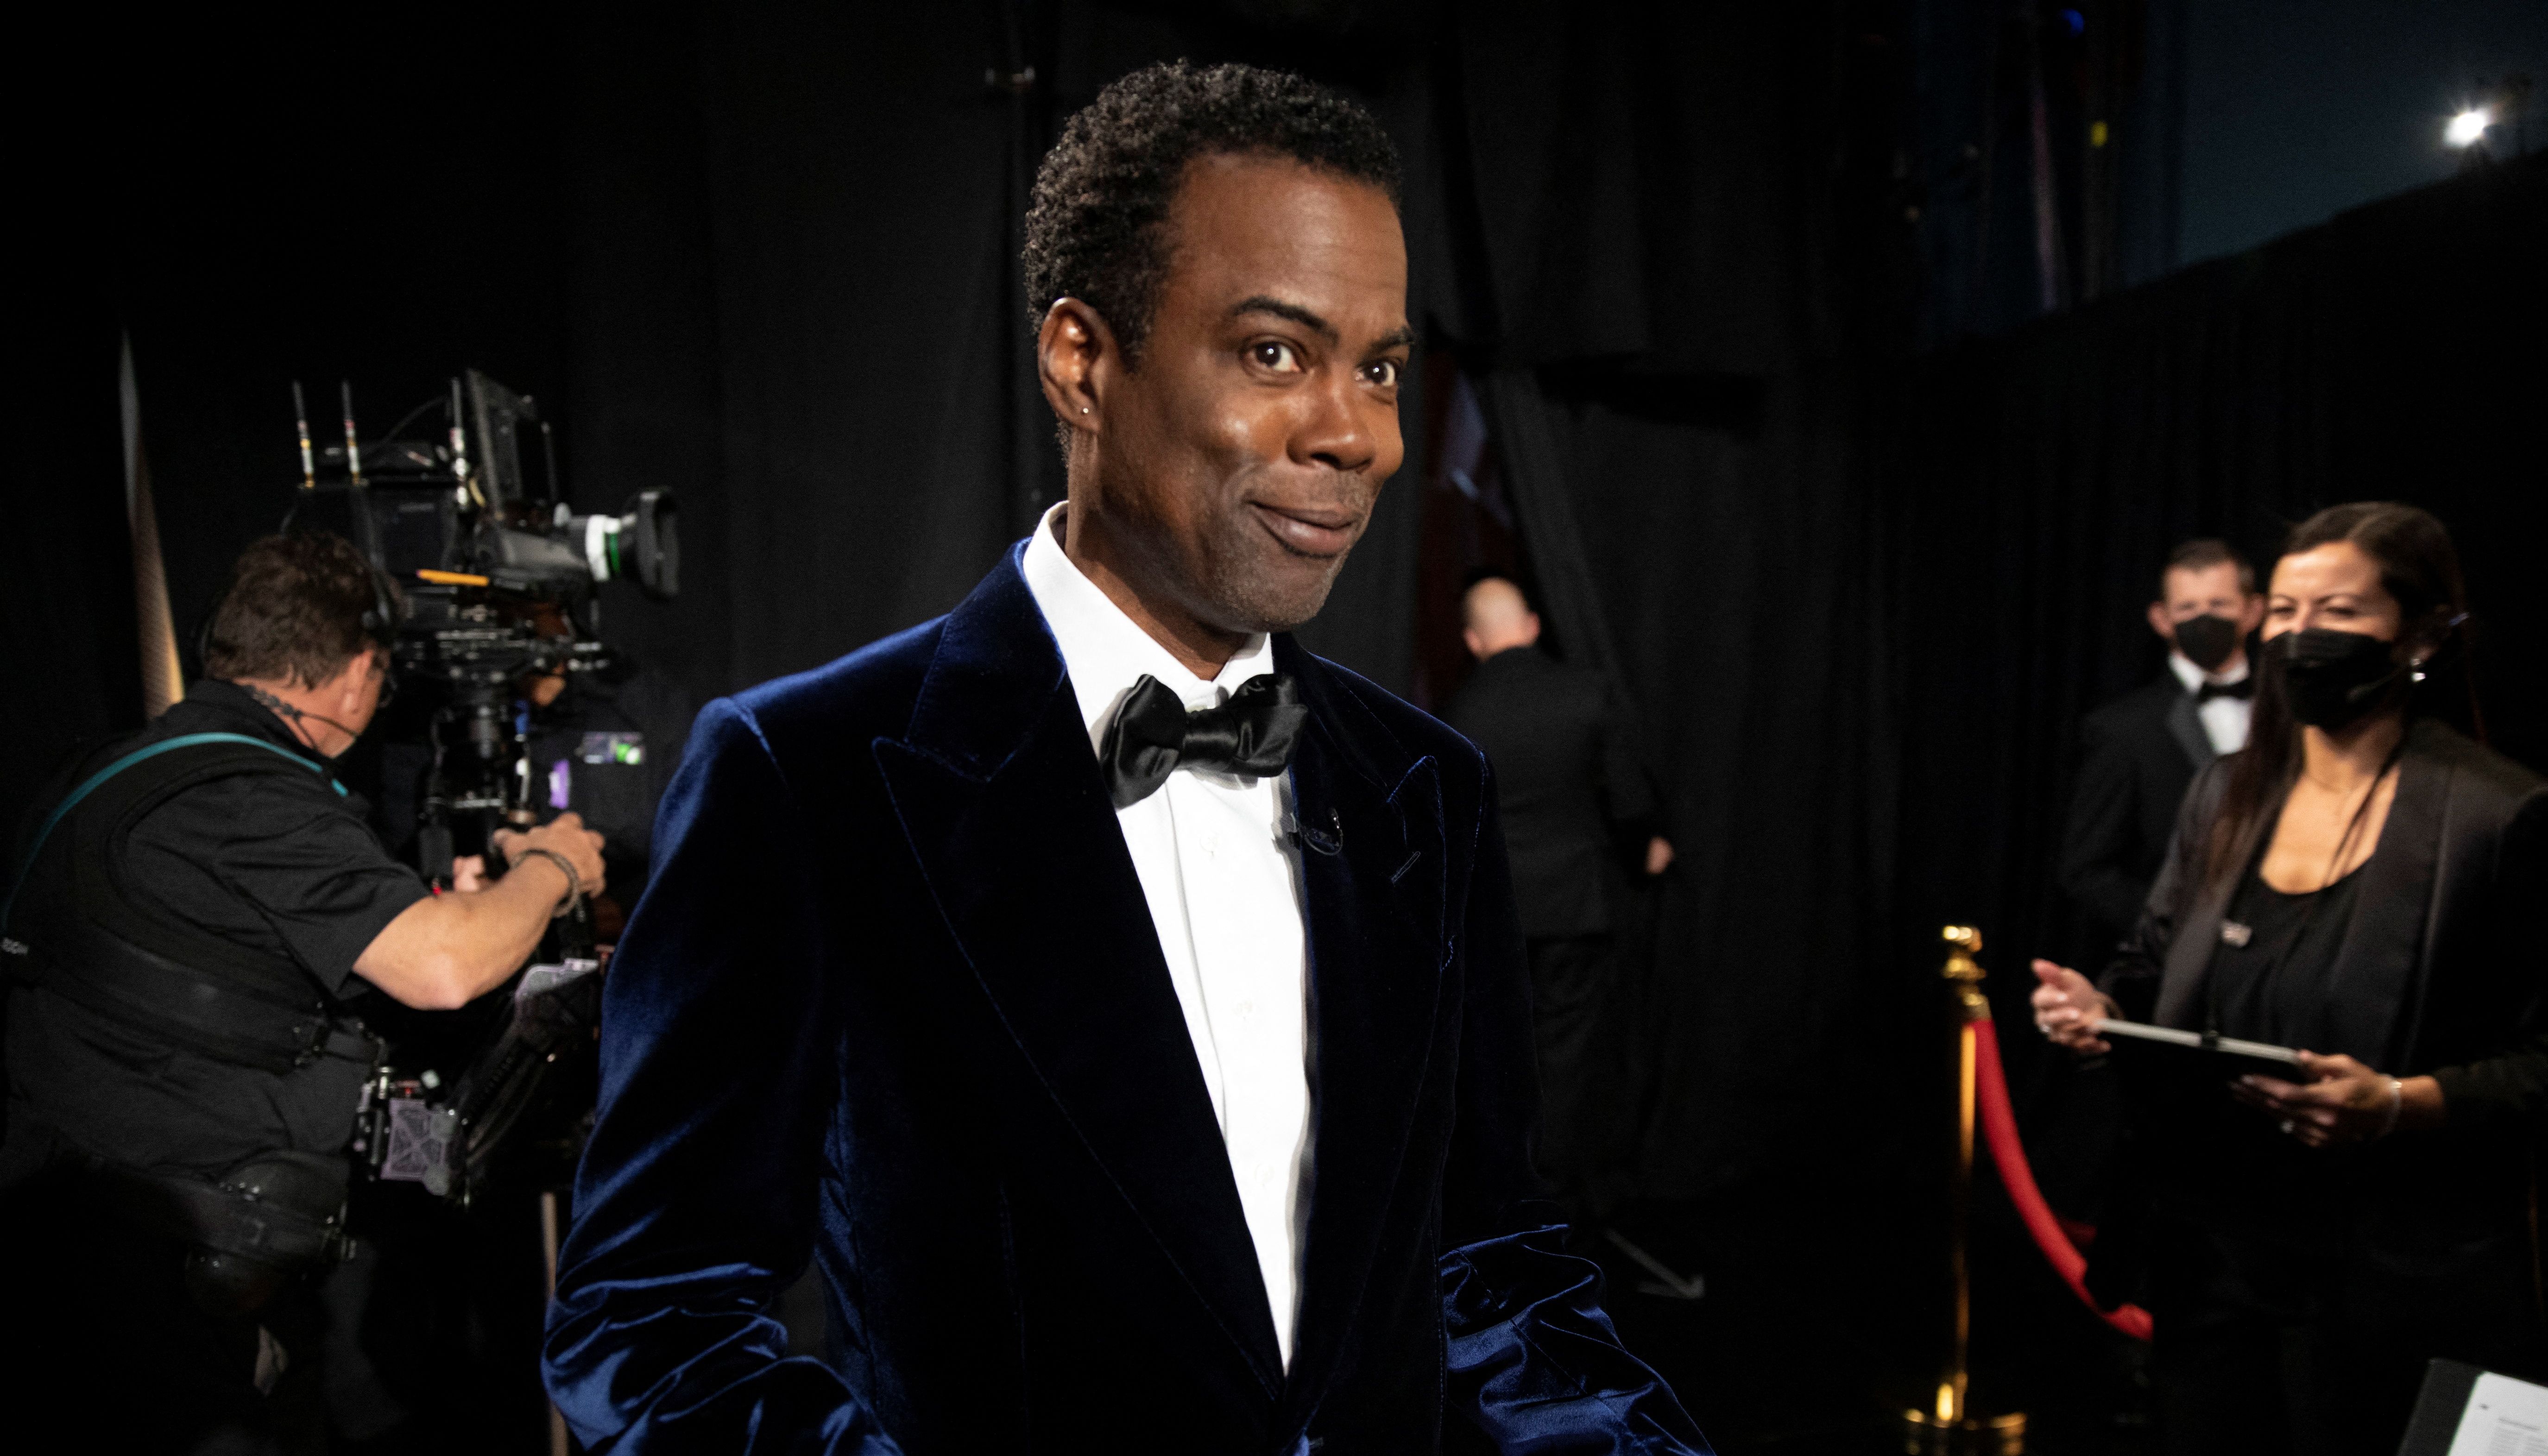 Chris Rock stands backstage at the 94th Academy Awards in Hollywood, Los Angeles, California, U.S., March 27, 2022. Al Seib/A.M.P.A.S./Handout via REUTERS ATTENTION EDITORS. THIS IMAGE HAS BEEN SUPPLIED BY A THIRD PARTY. NO MARKETING OR ADVERTISING IS PERMITTED WITHOUT THE PRIOR CONSENT OF A.M.P.A.S AND MUST BE DISTRIBUTED AS SUCH. MANDATORY CREDIT.